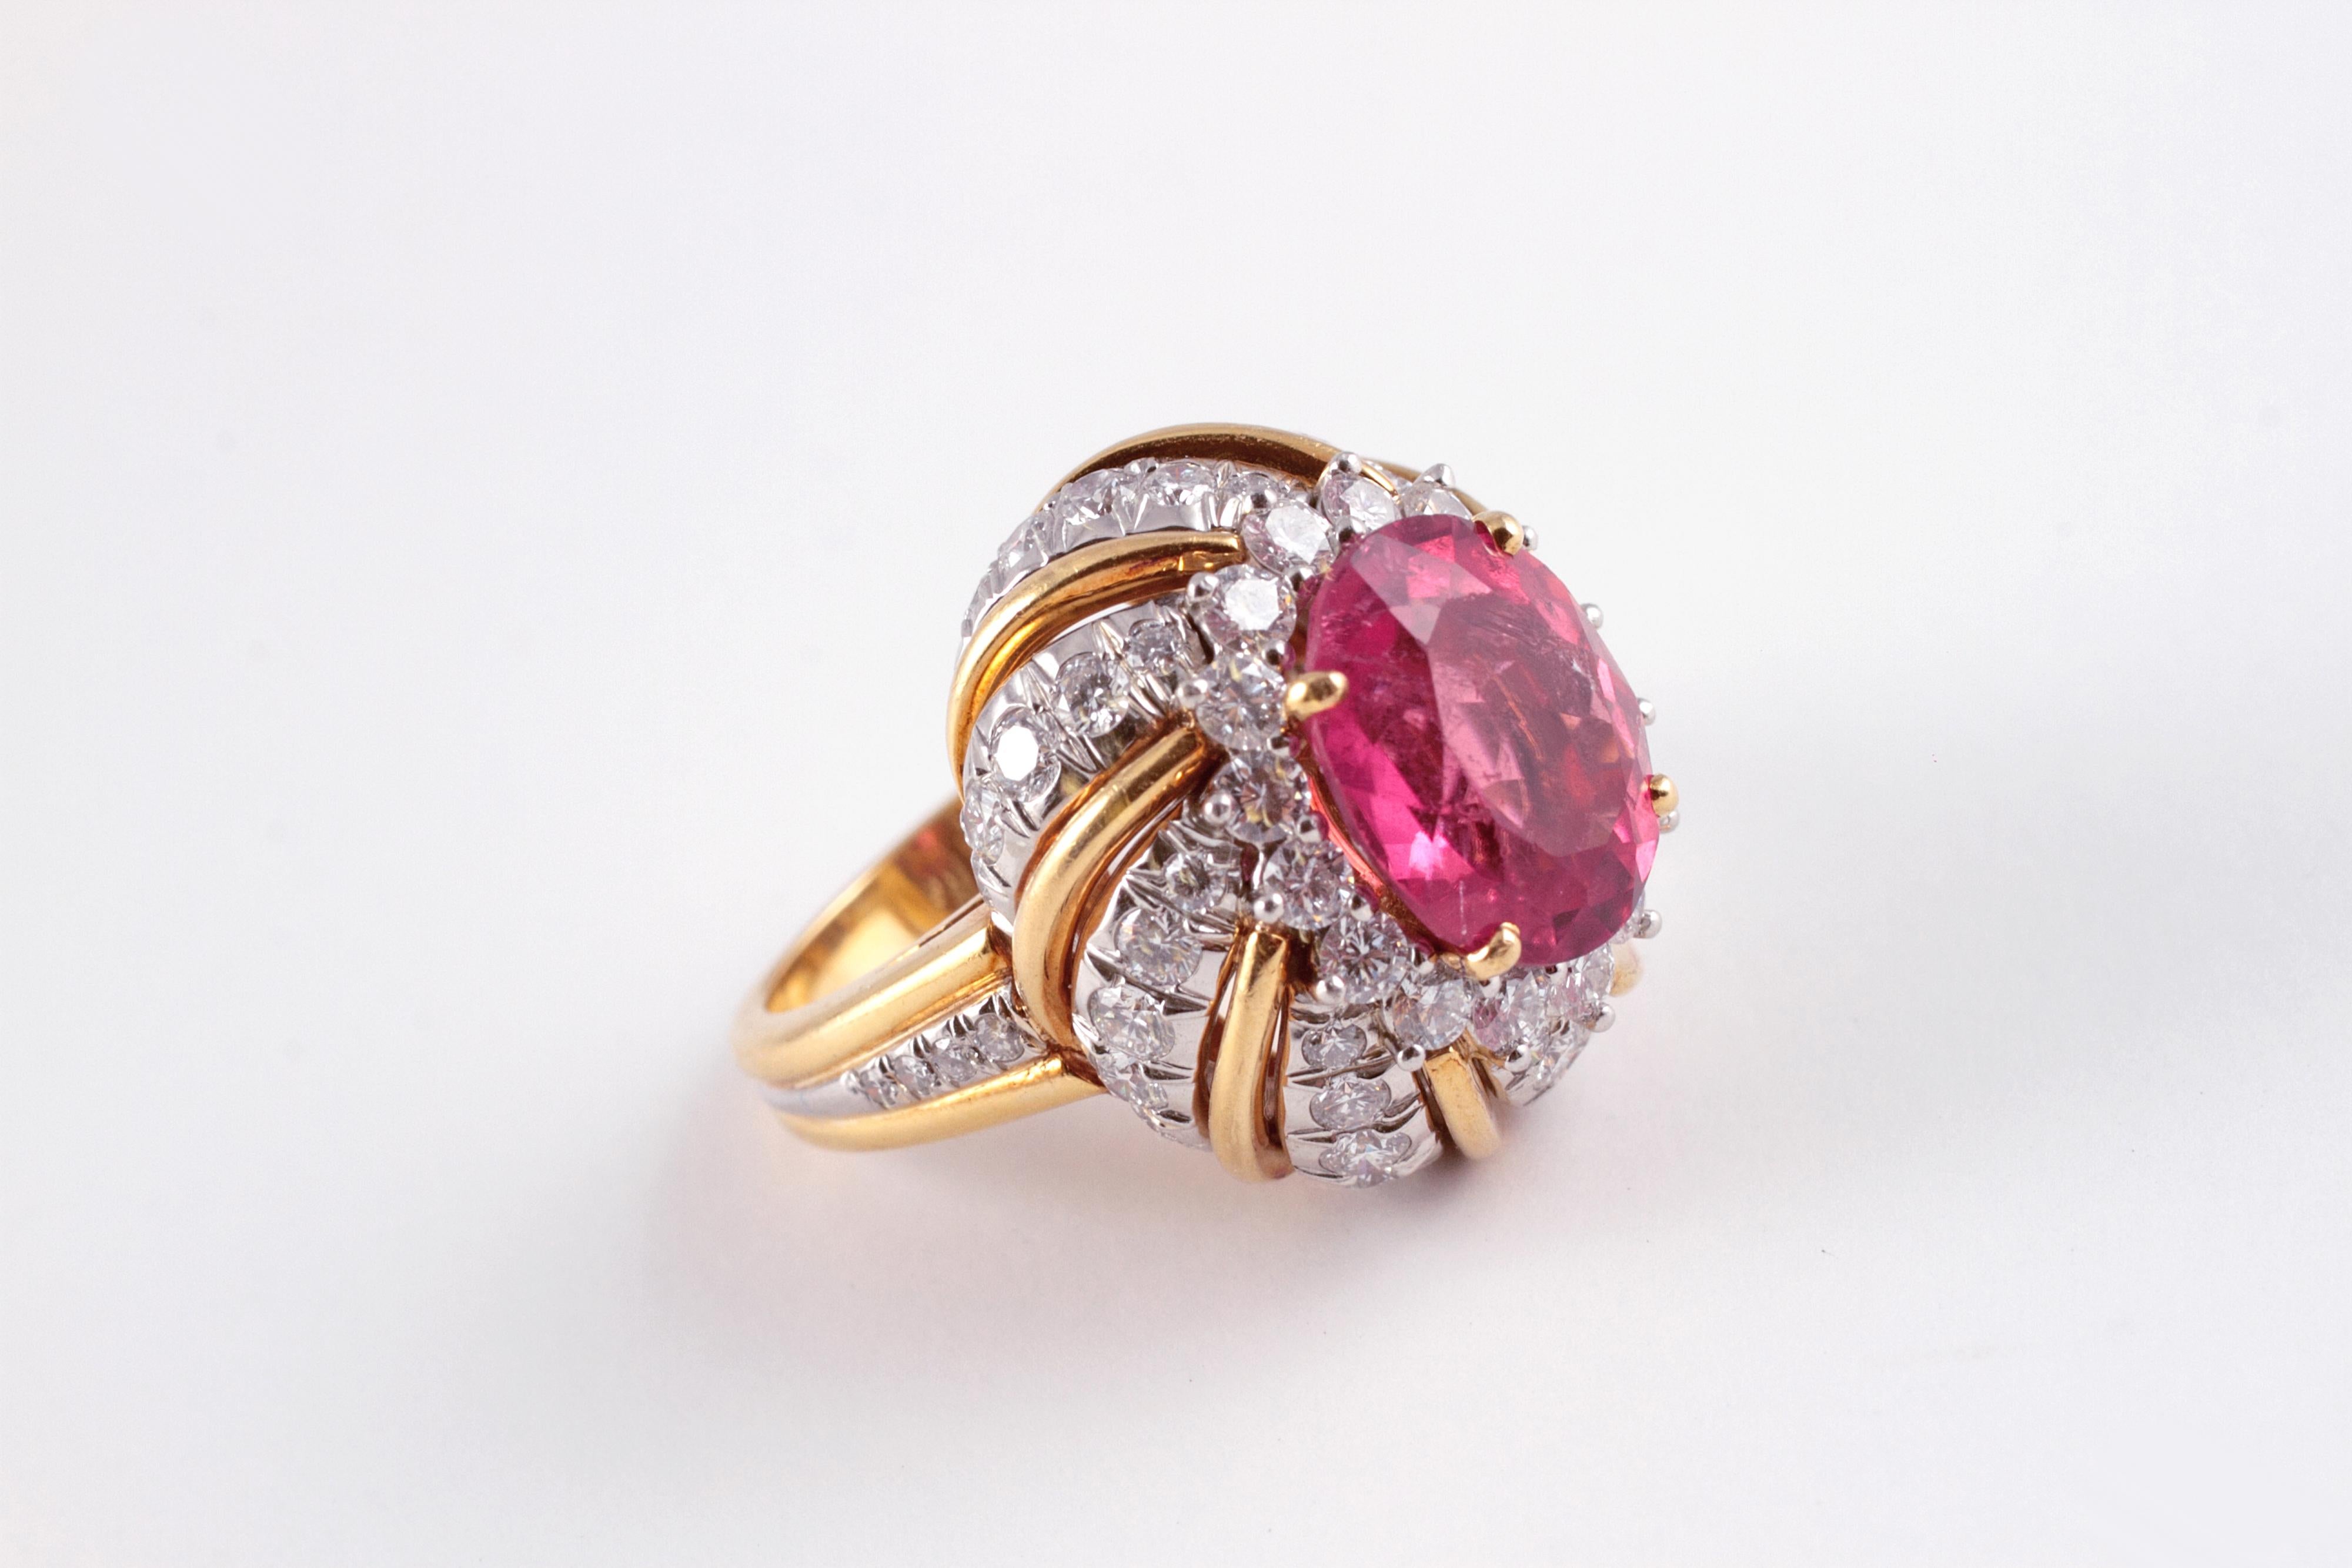 A Tiffany Stunner!  This ring features a lovely 4.95 carat rubellite and 2.05 carats of diamonds that are stated to be VS 1 - VS 2 in clarity and G - H in color.  Size 5 1/2. 